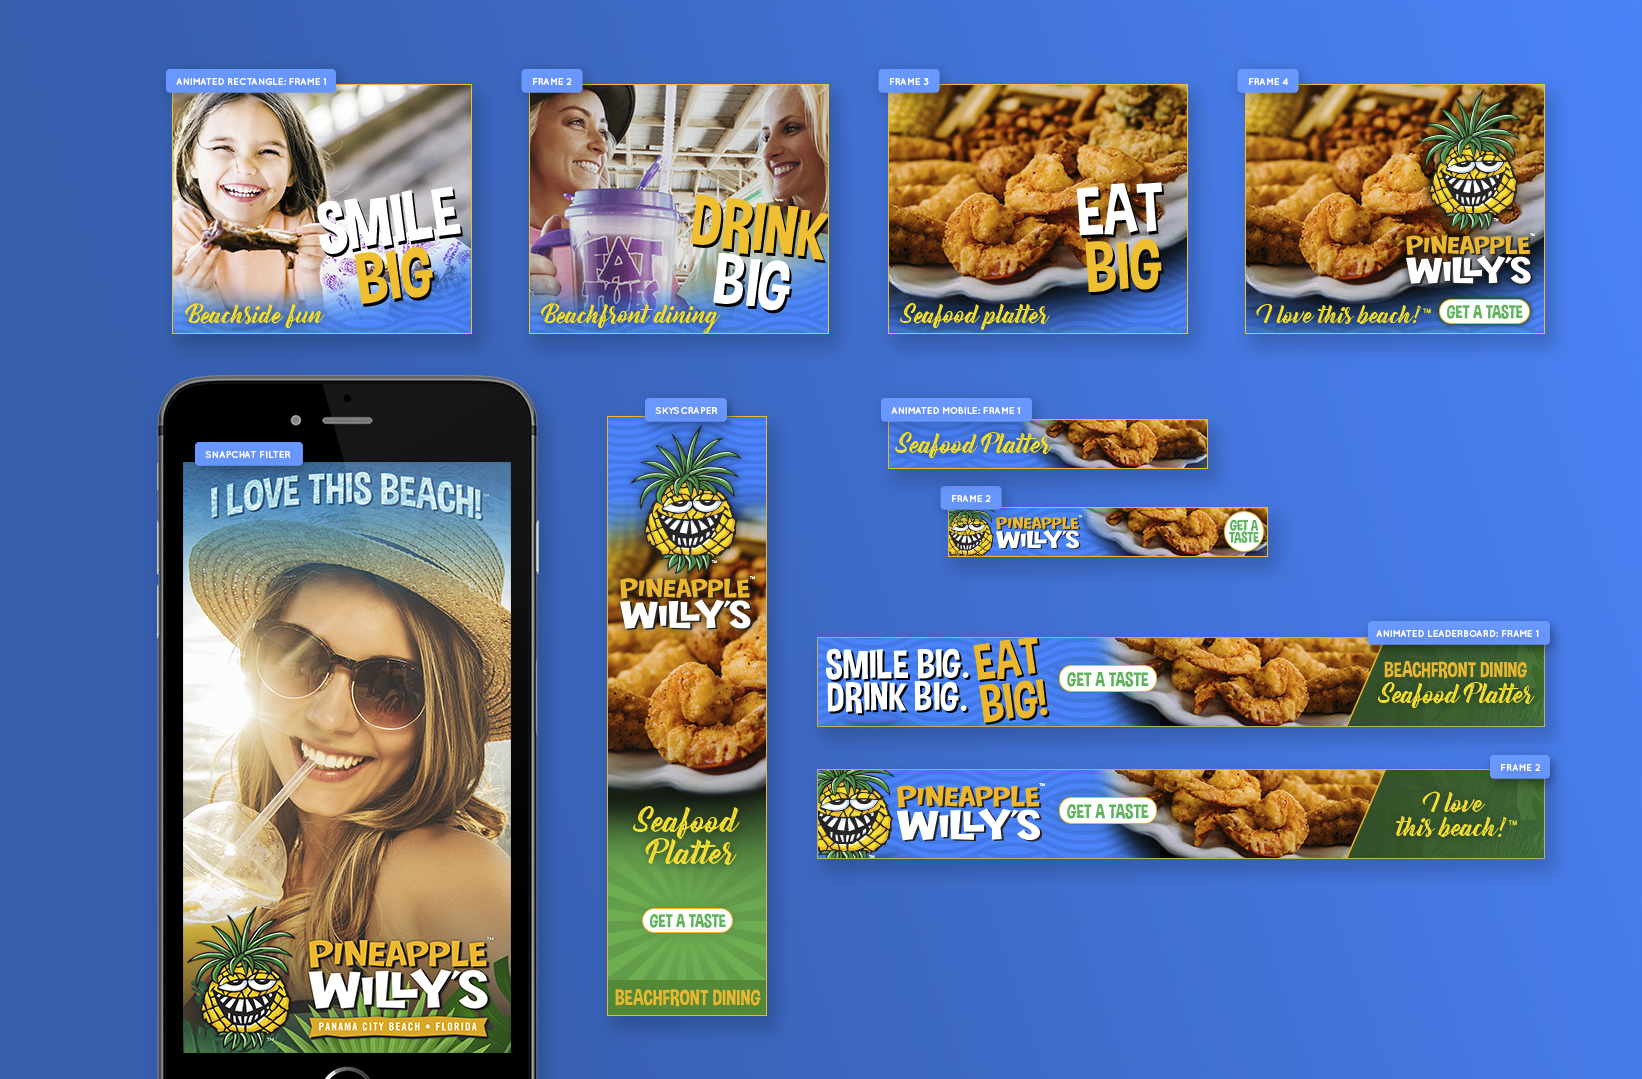 I Love This Beach Digital Campaign for Pineapple Willy's ADDY award submission.